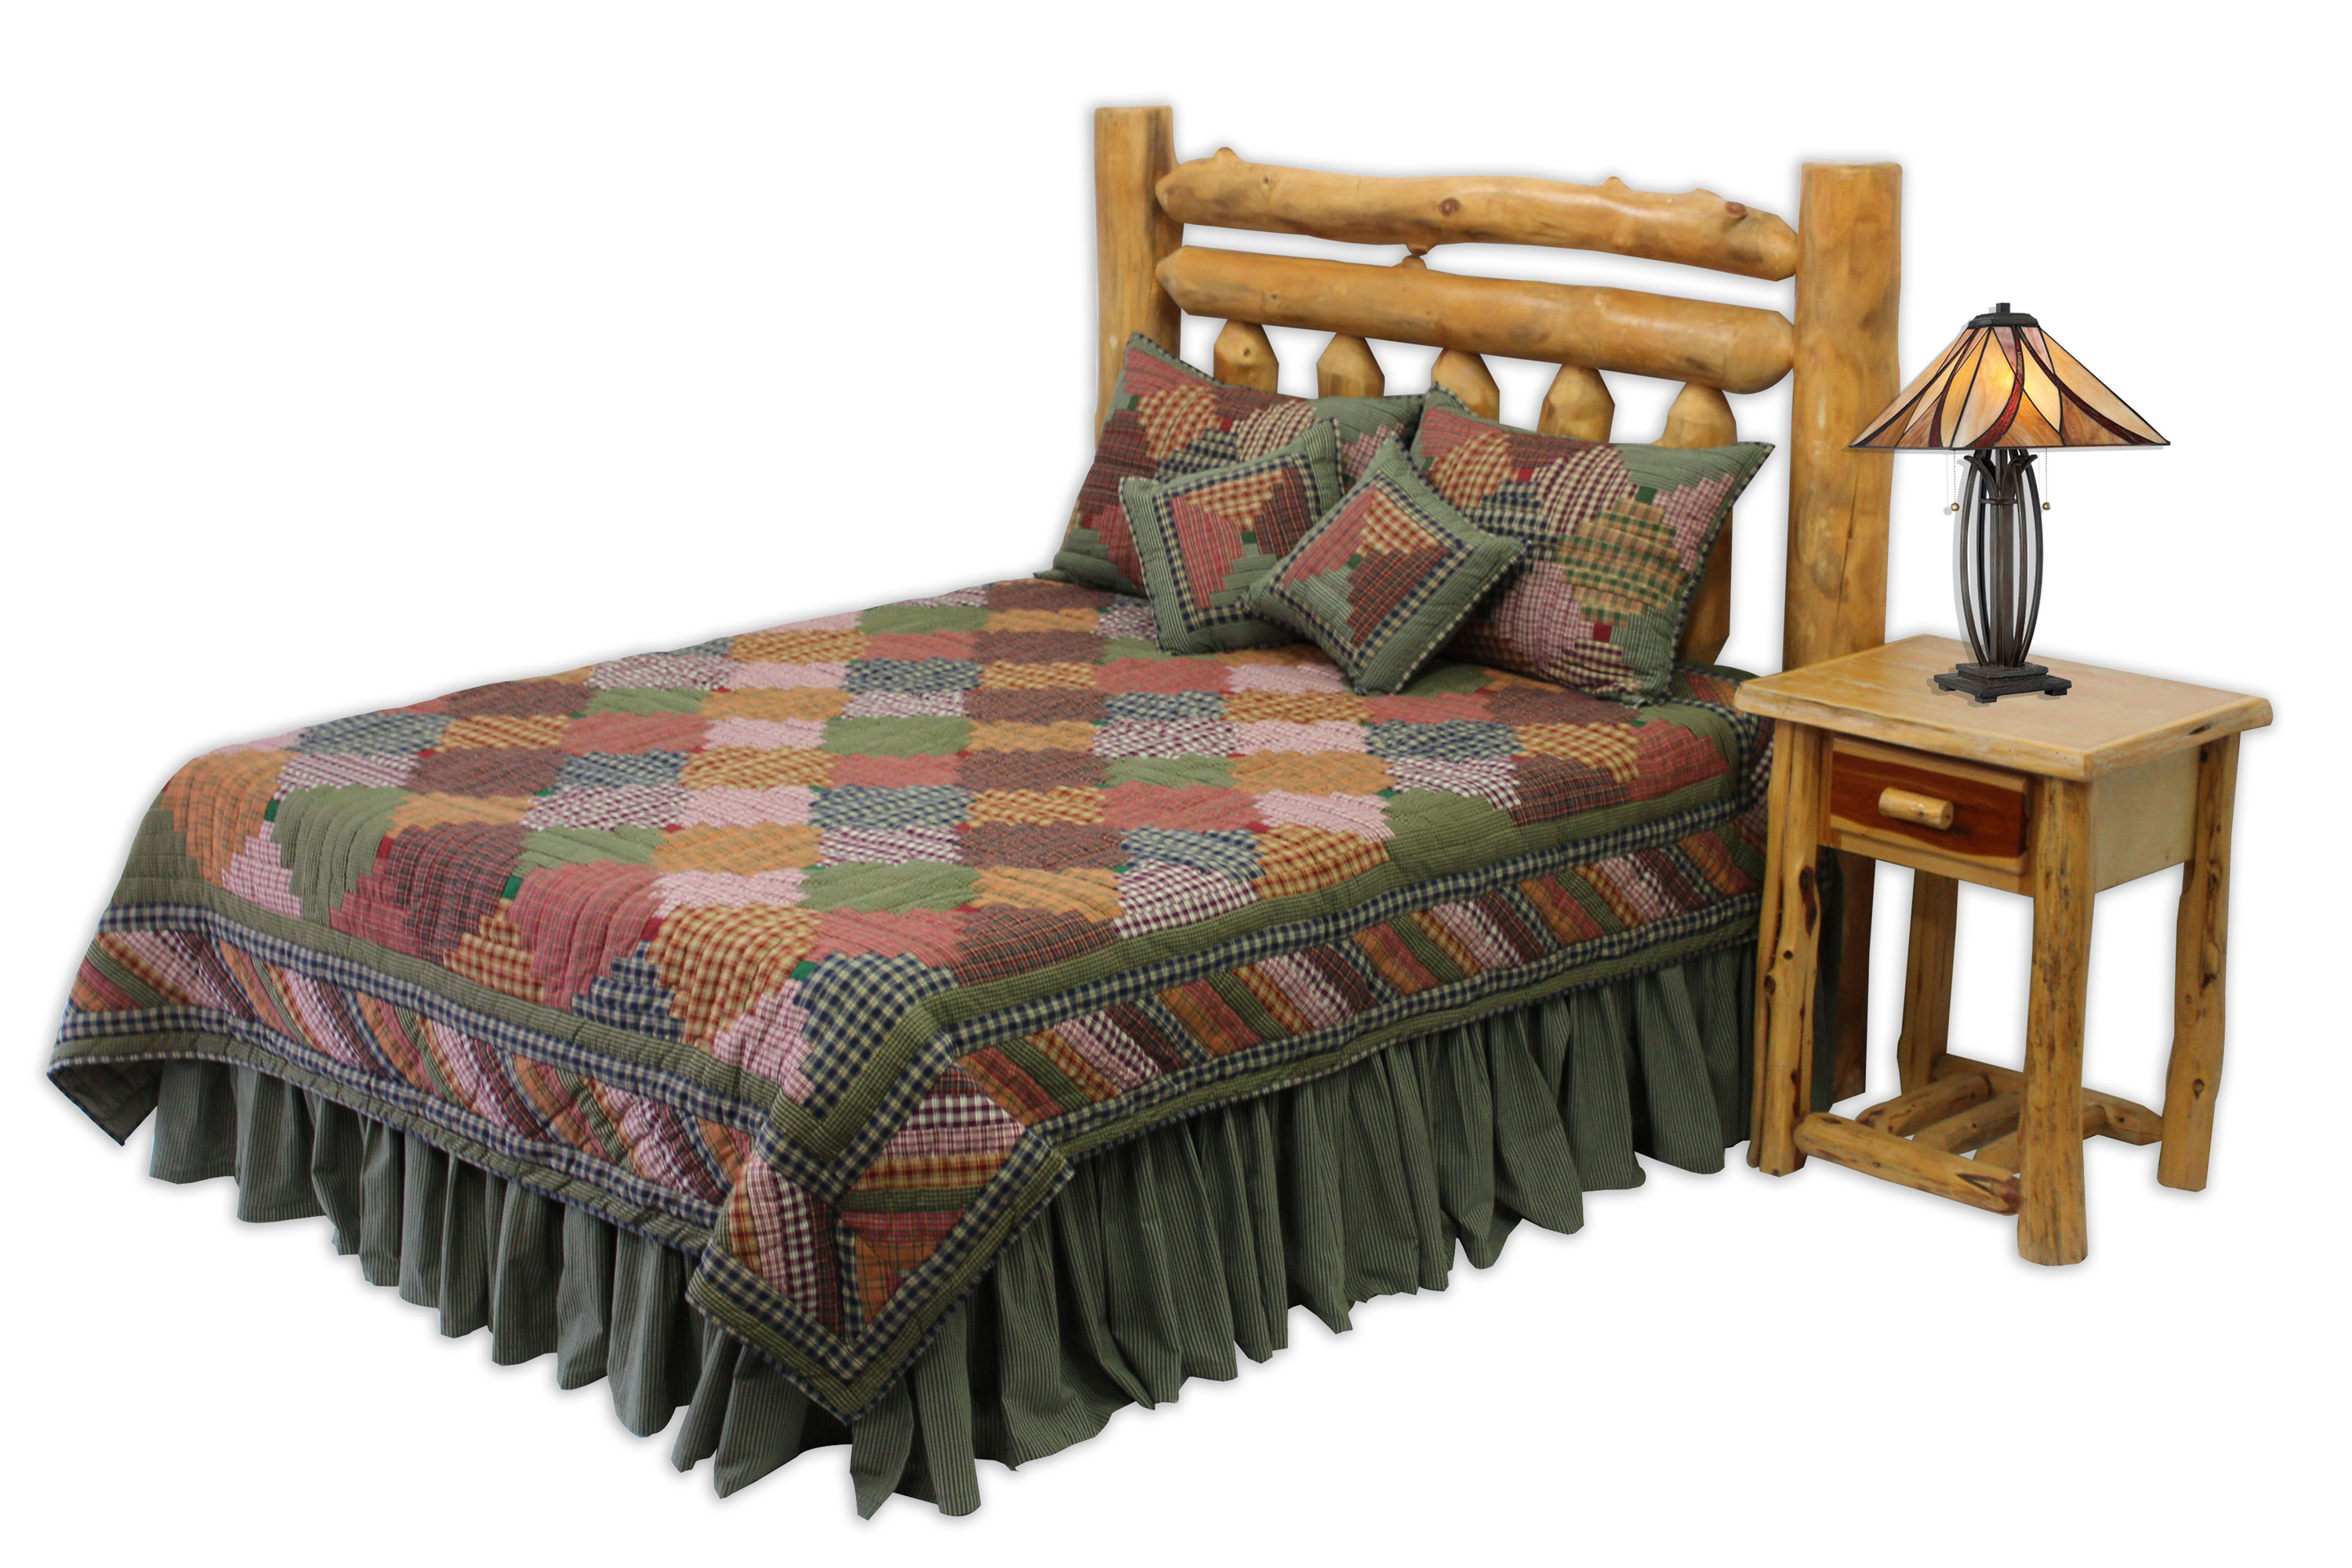 Buy a Twin Size Quilt and Get a Matching Pillow Shams FREE | Harvest Log Cabin Twin Quilt 65"W x 85"L